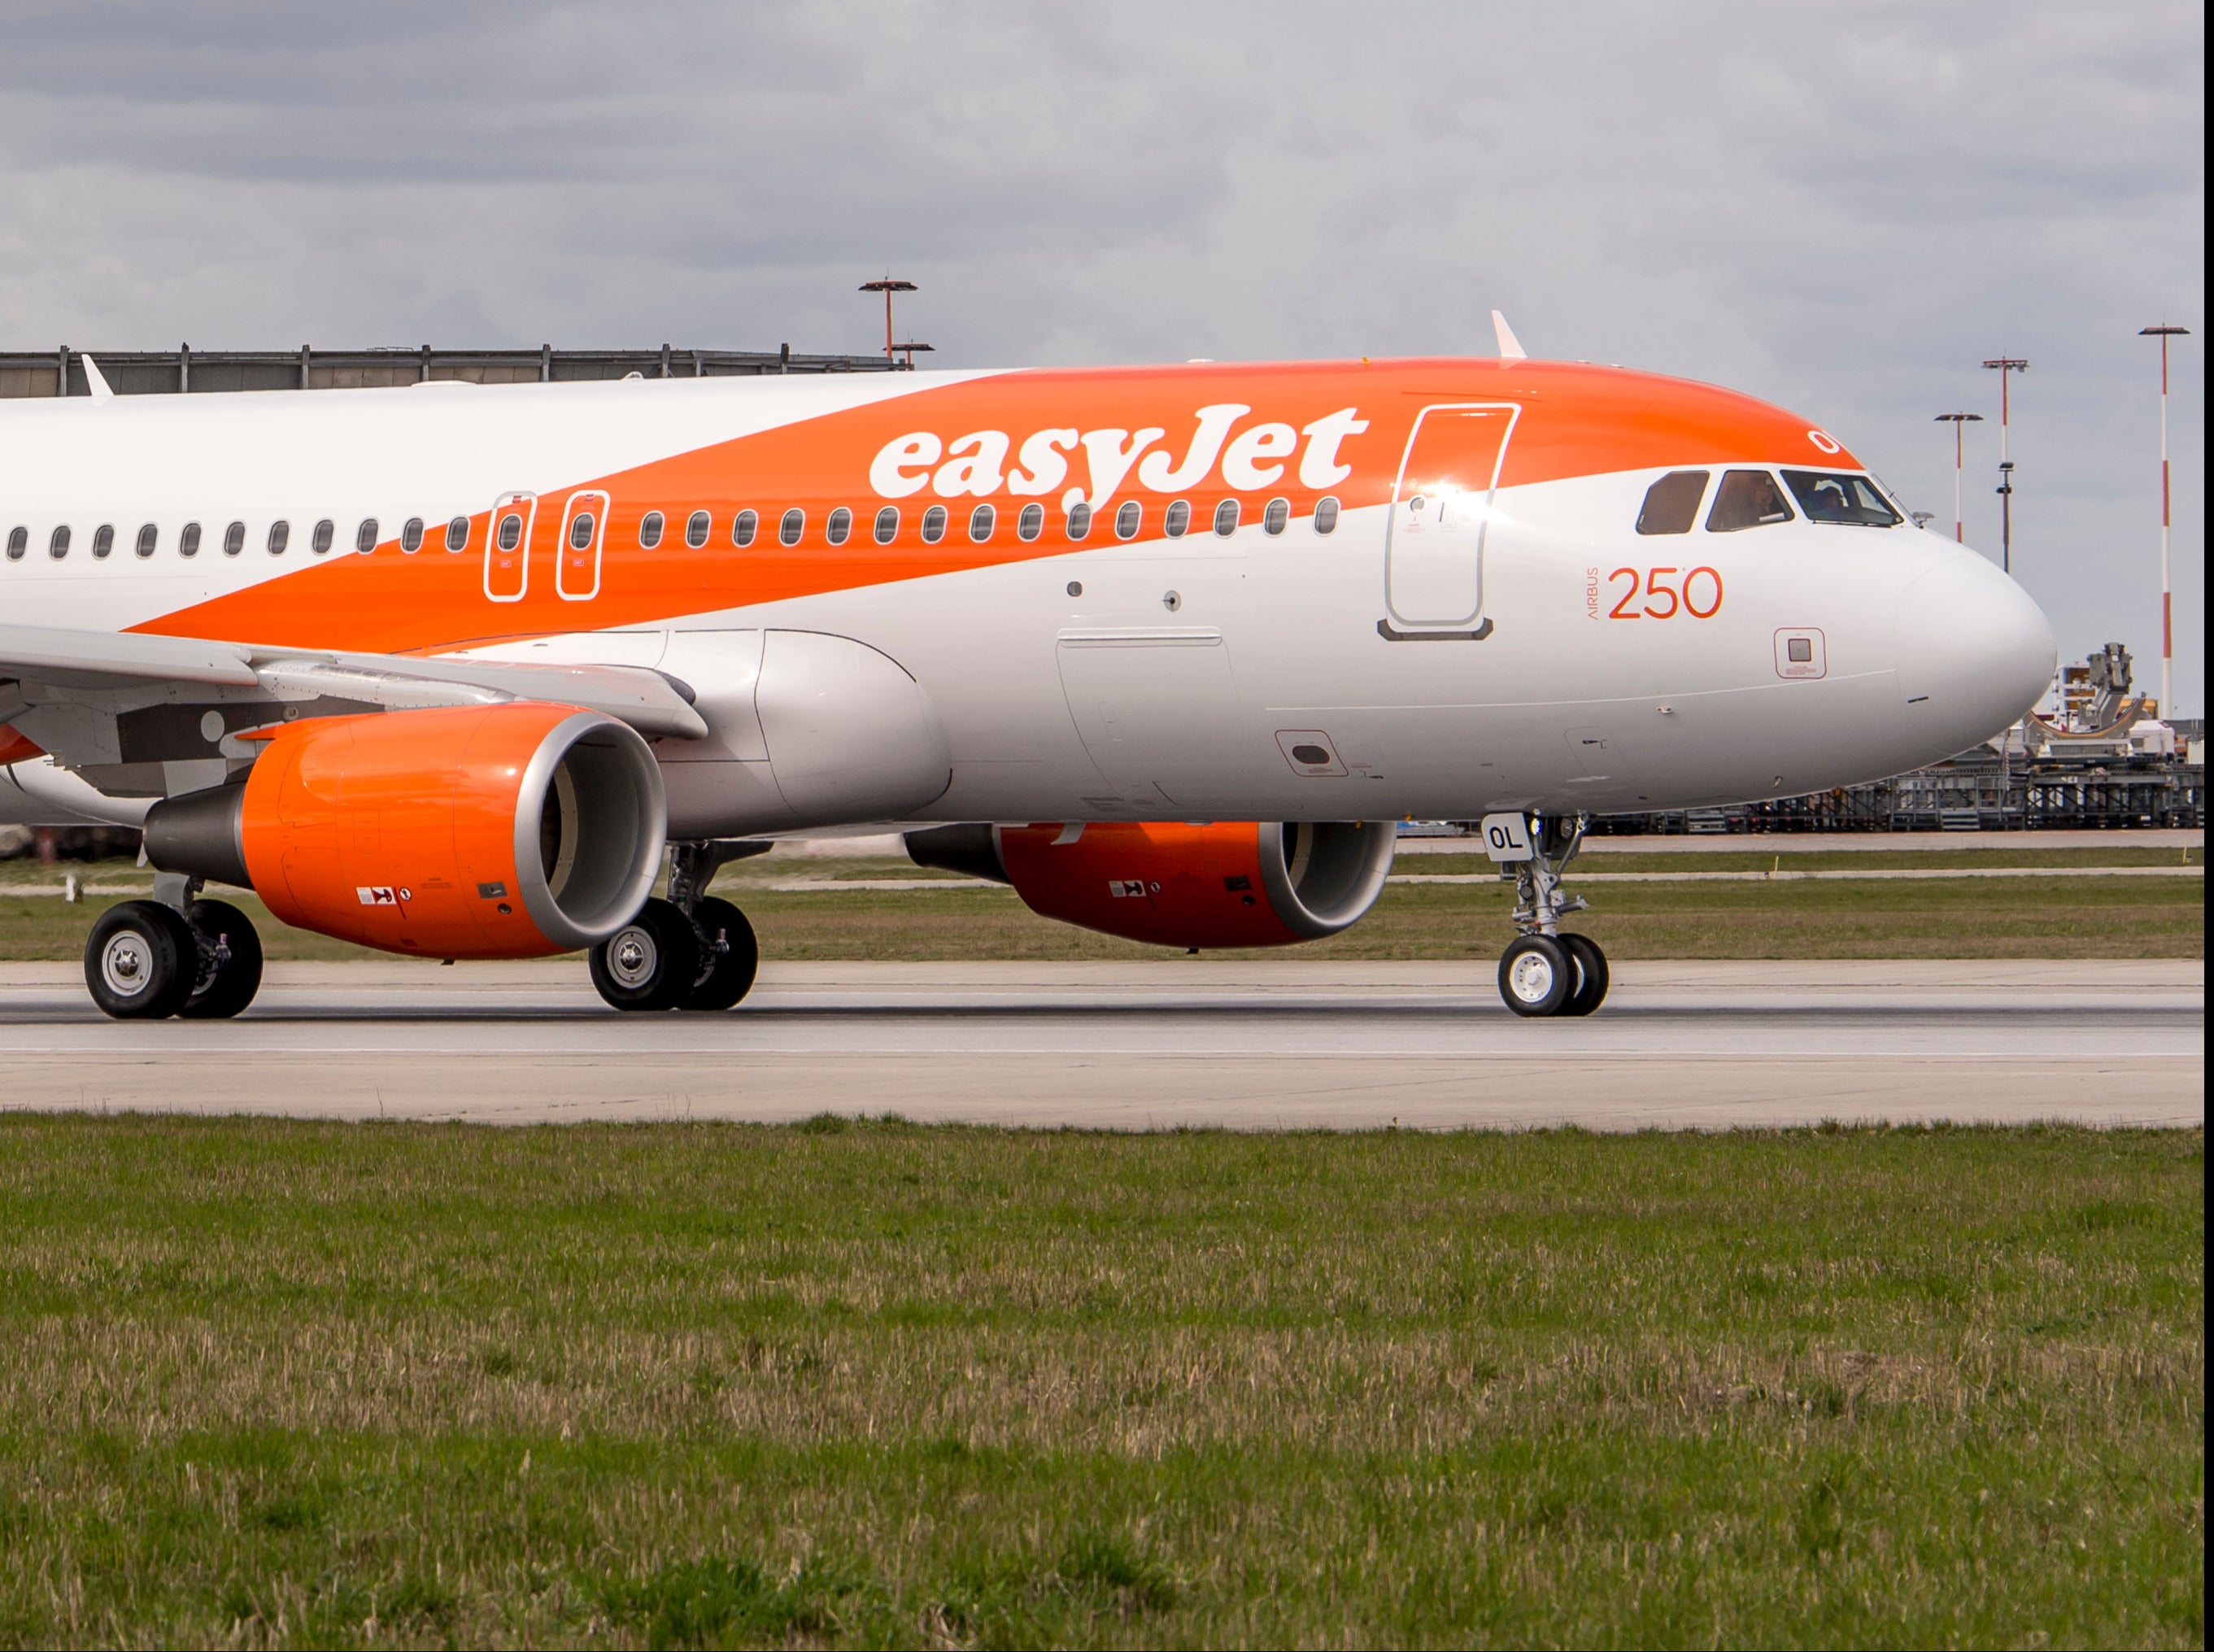 Happier times: easyJet’s 250th Airbus aircraft delivery